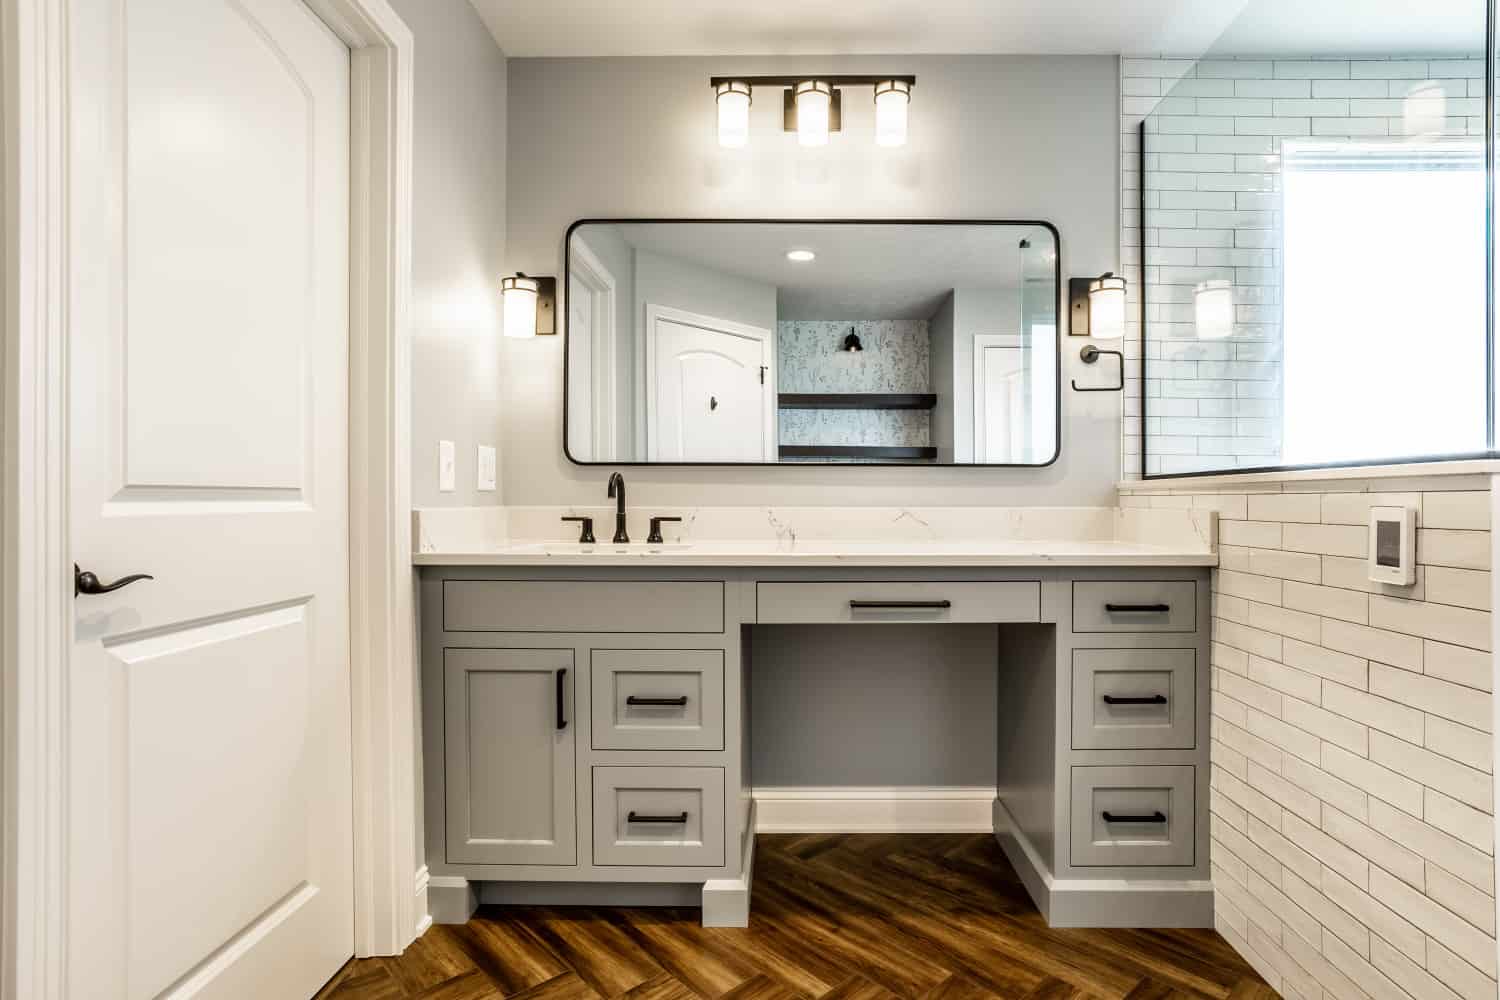 Nicholas Design Build | A bathroom with a white vanity and wood floors, featuring black accents.